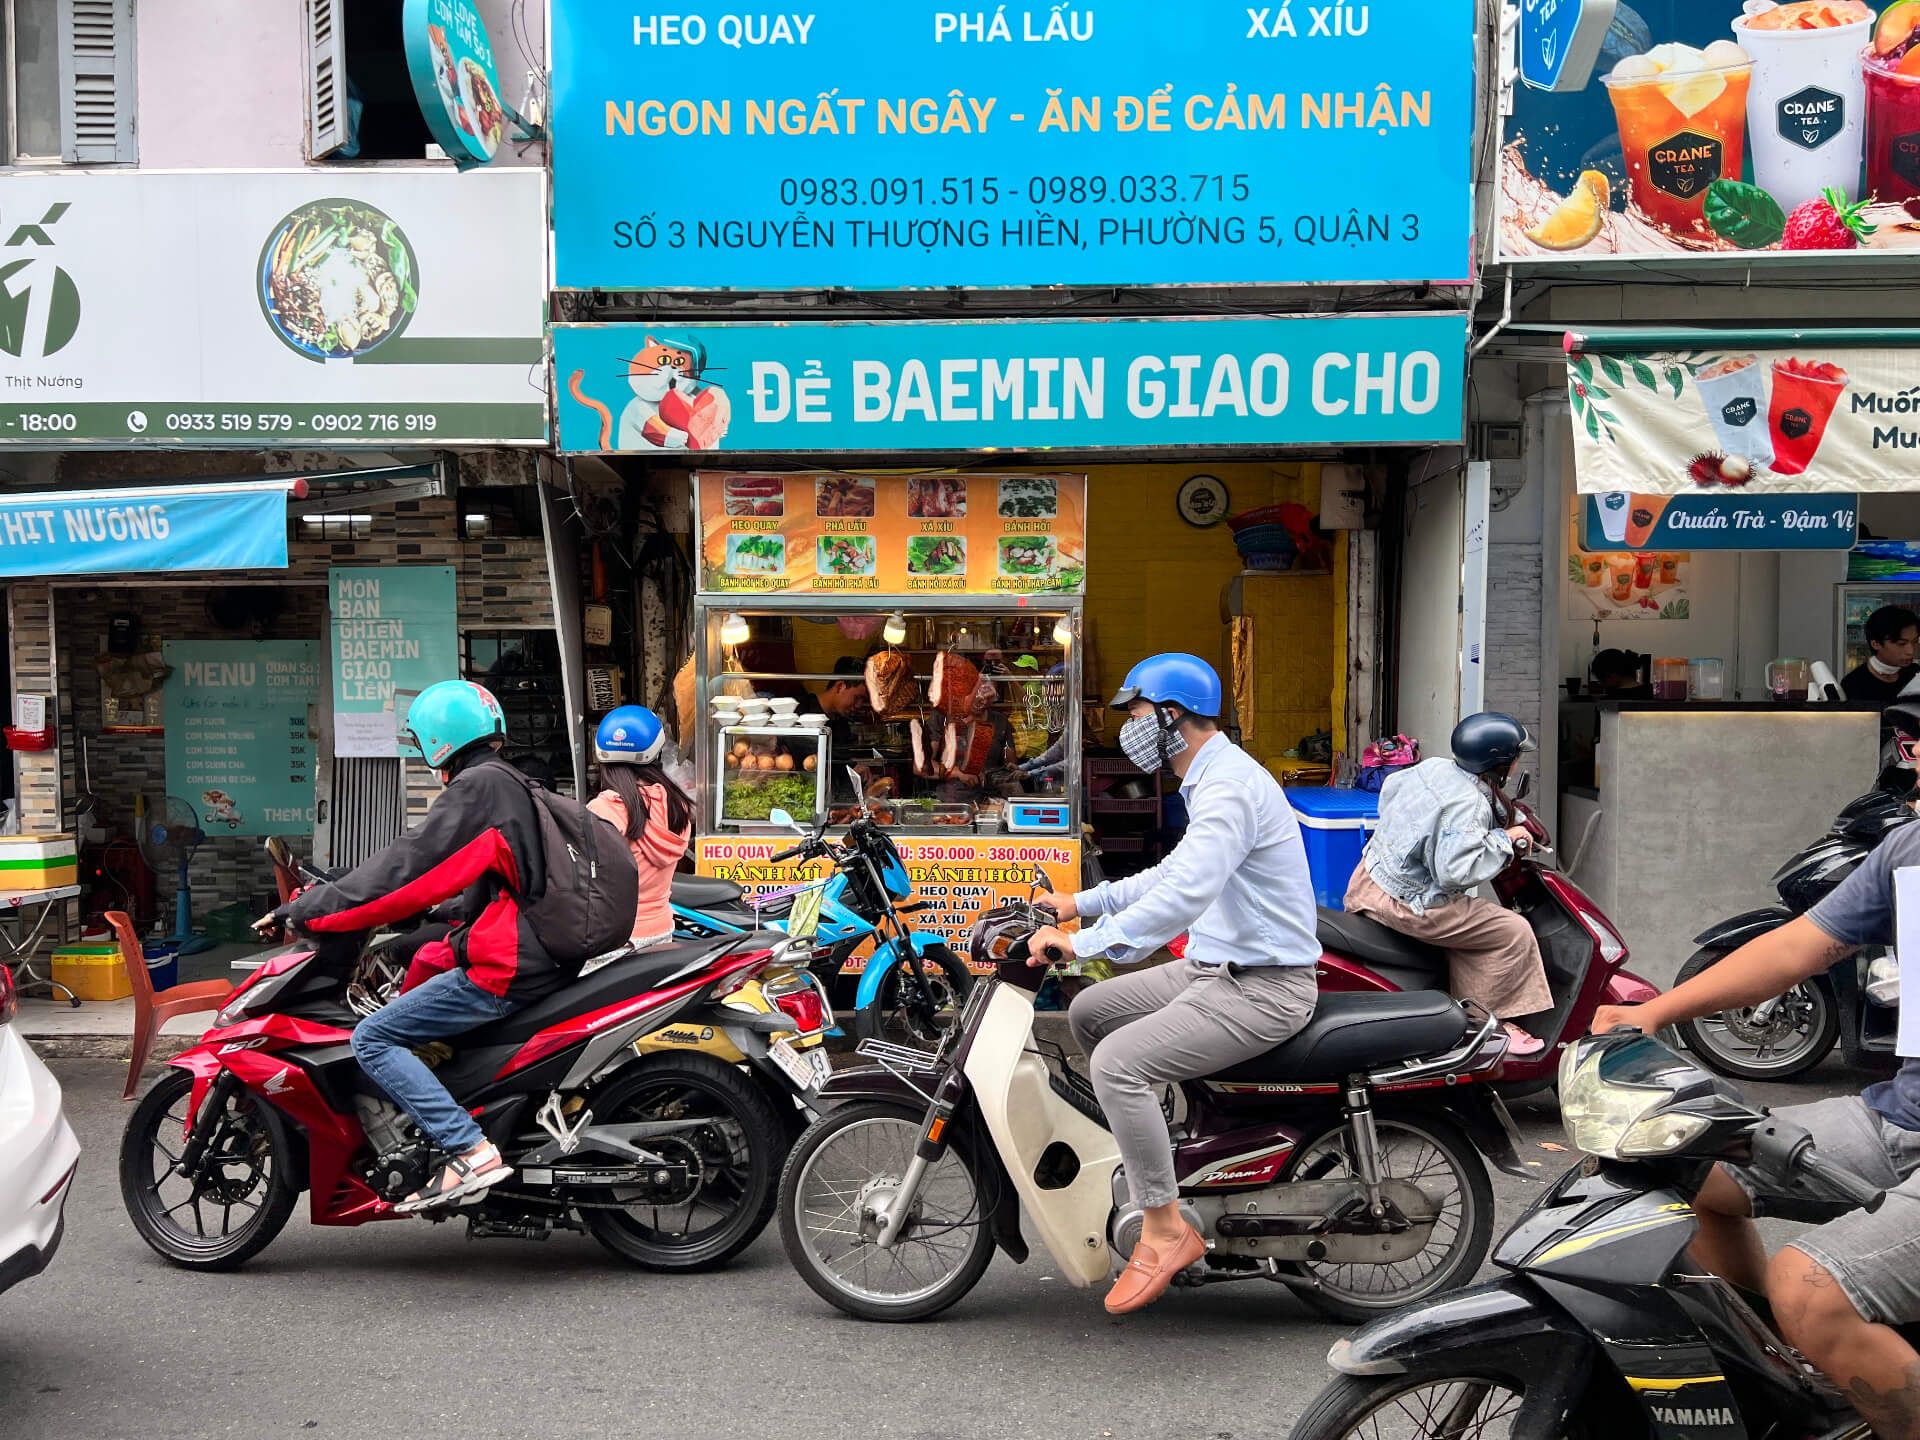 Motorbikes passing the Banh Mi stand in Ho Chi Minh City.